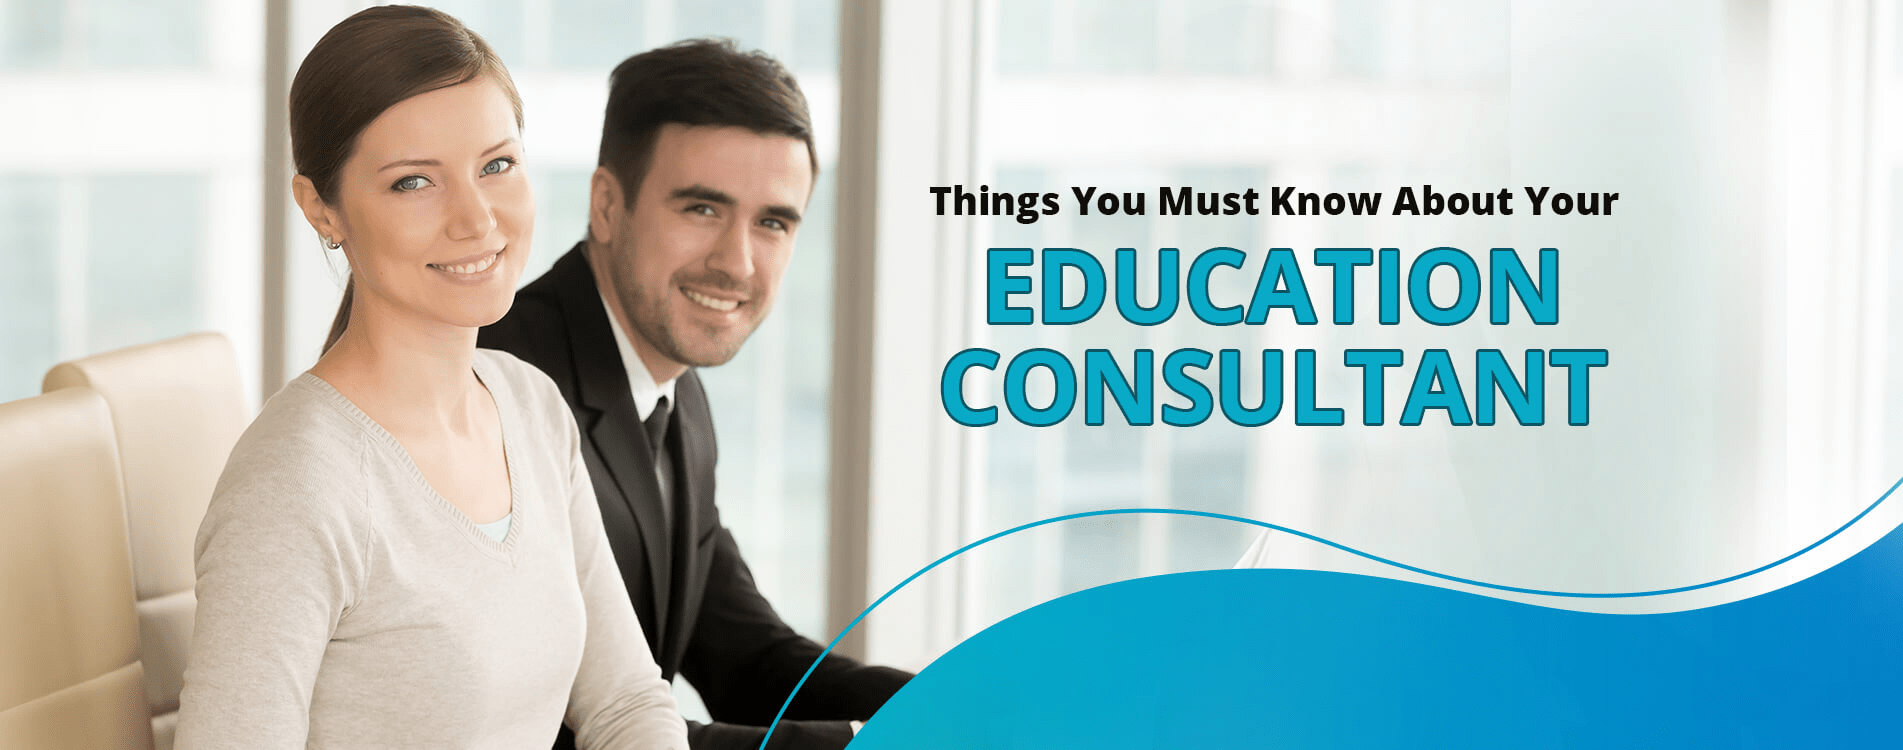 Things You Must Know About Your Education Consultant